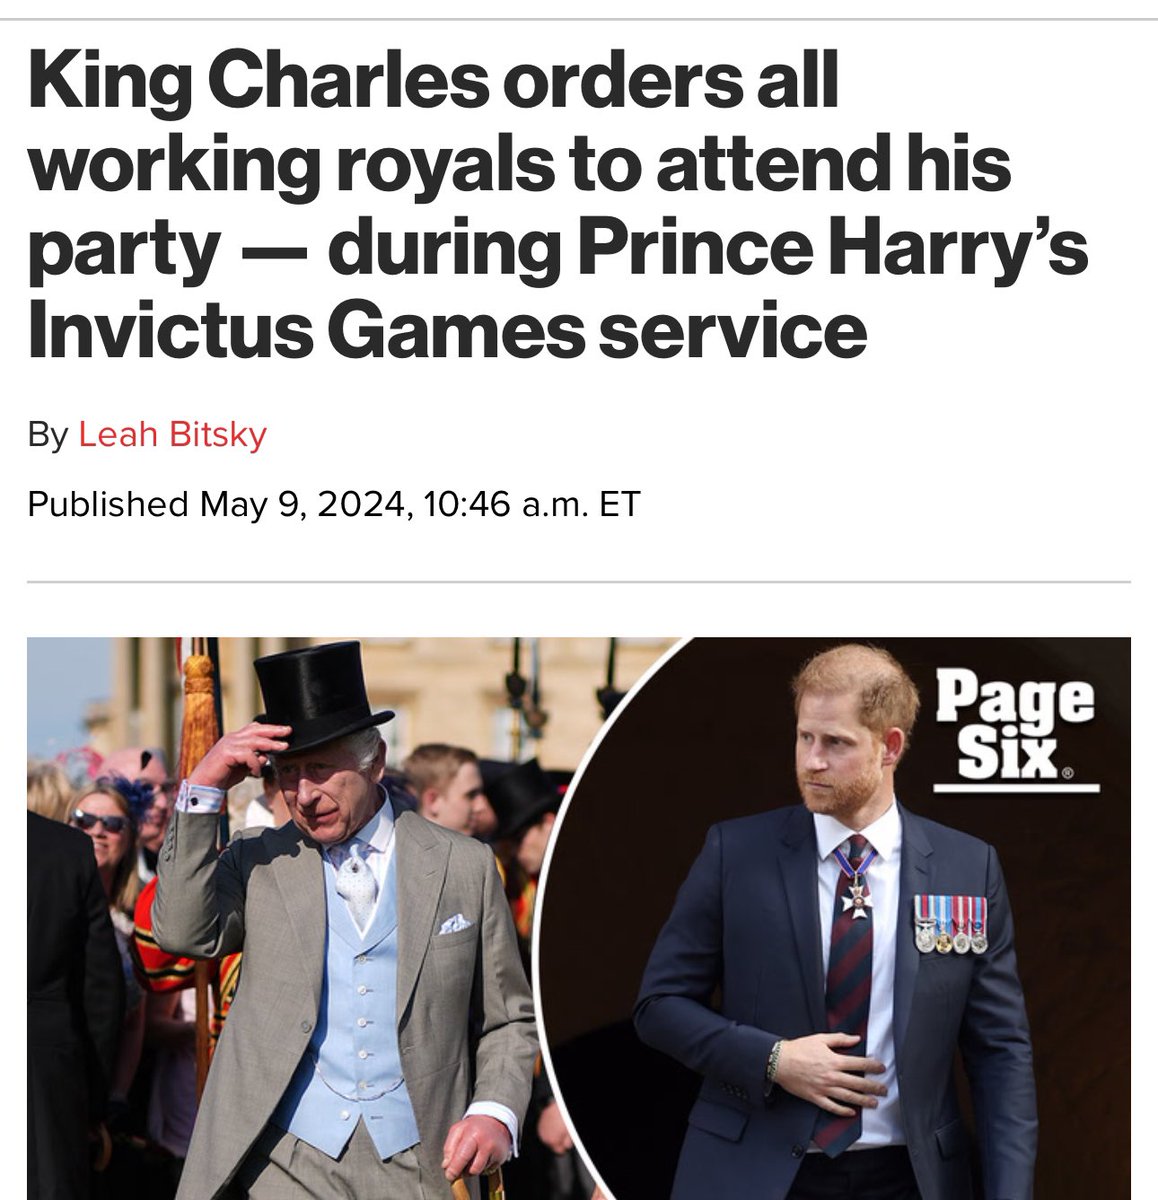 Did #KingCharles not order everyone to stay away from #PrinceHarry’s #InvictusGames service?